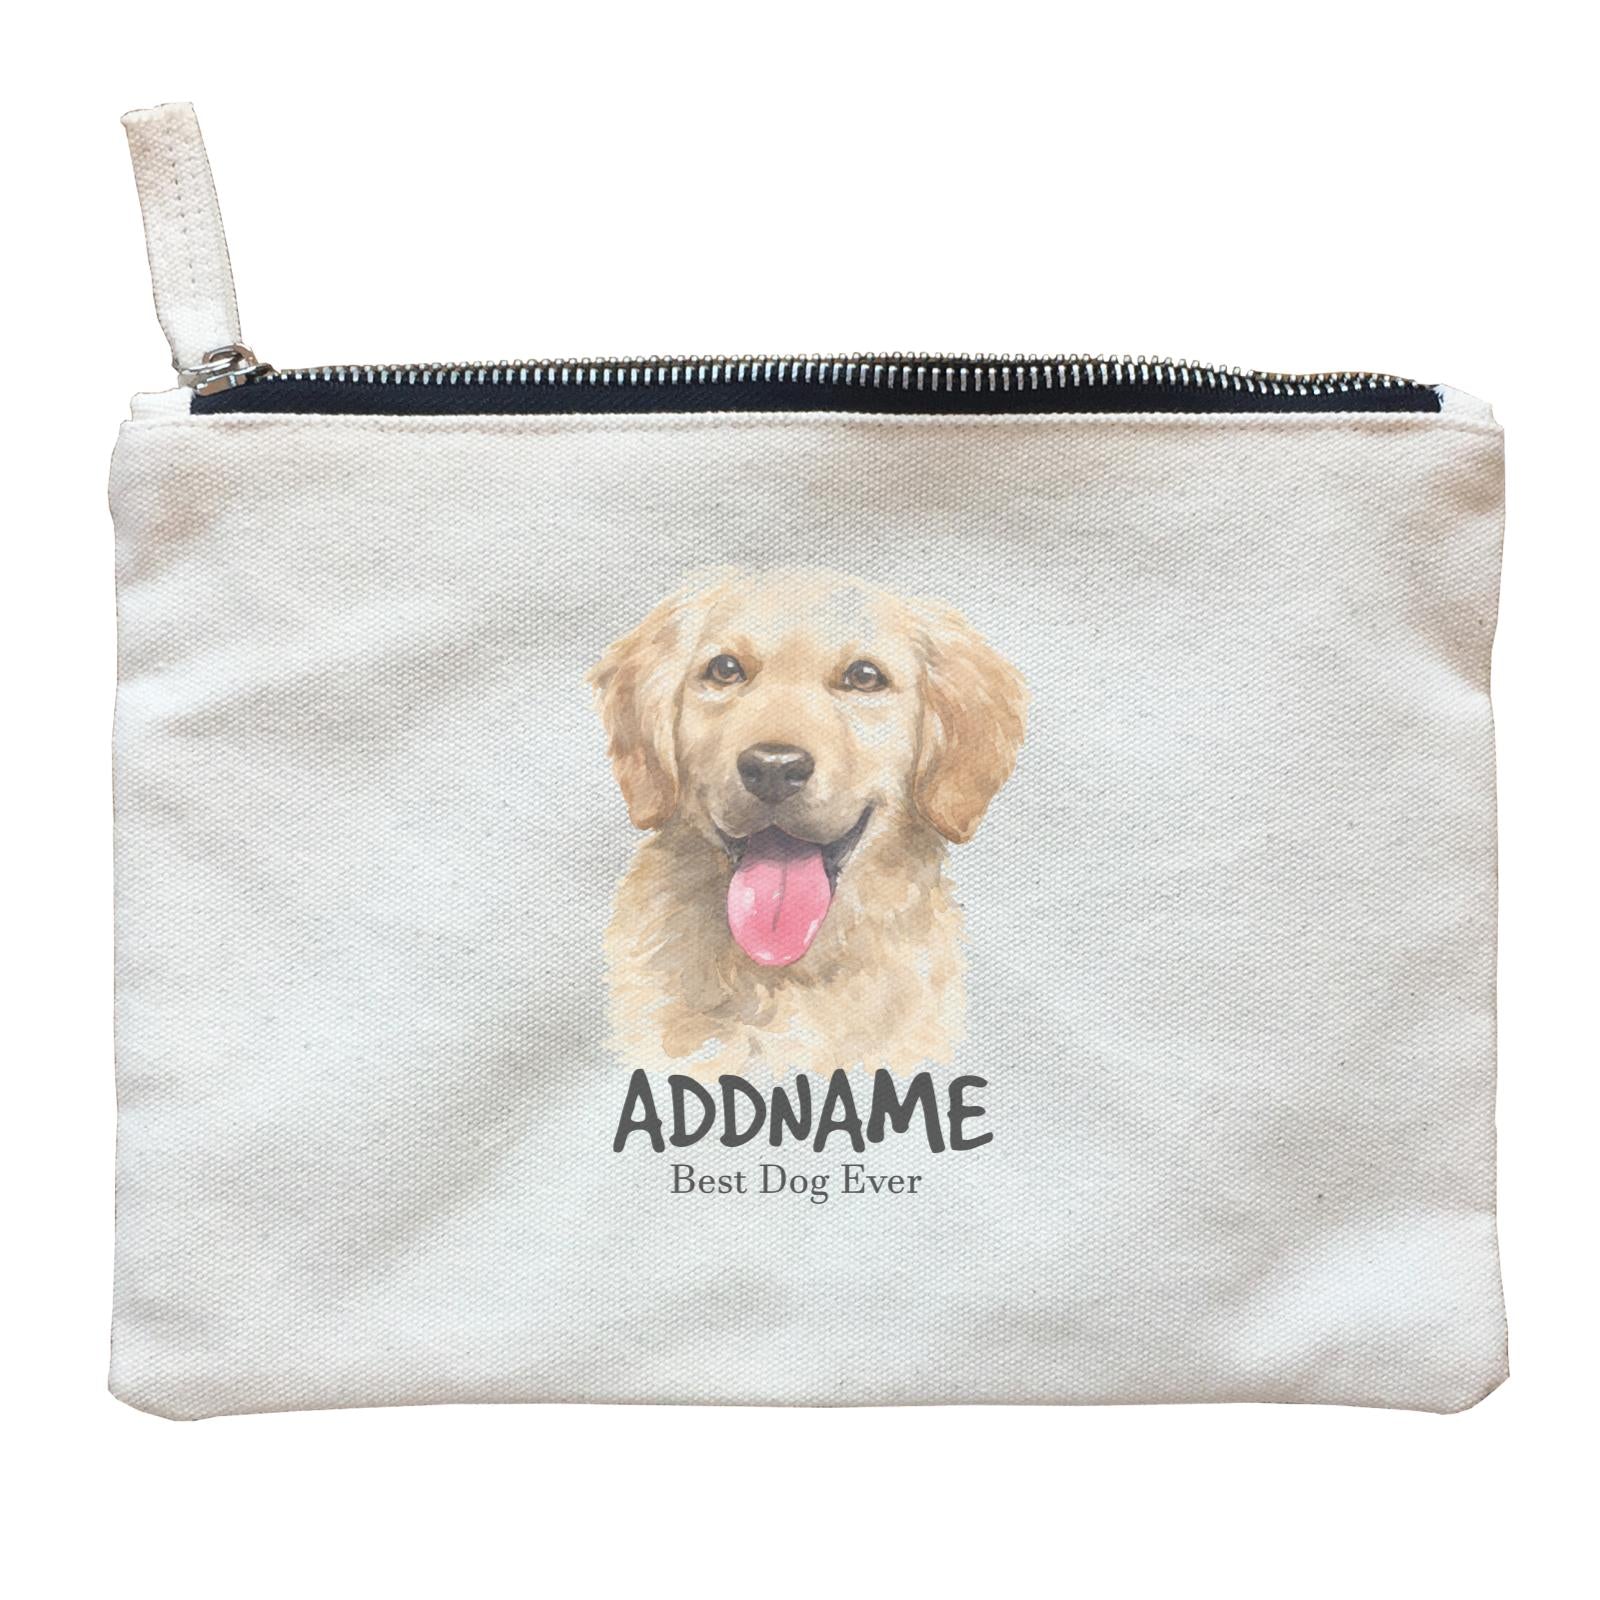 Watercolor Dog Golden Retriever Smile Best Dog Ever Addname Zipper Pouch